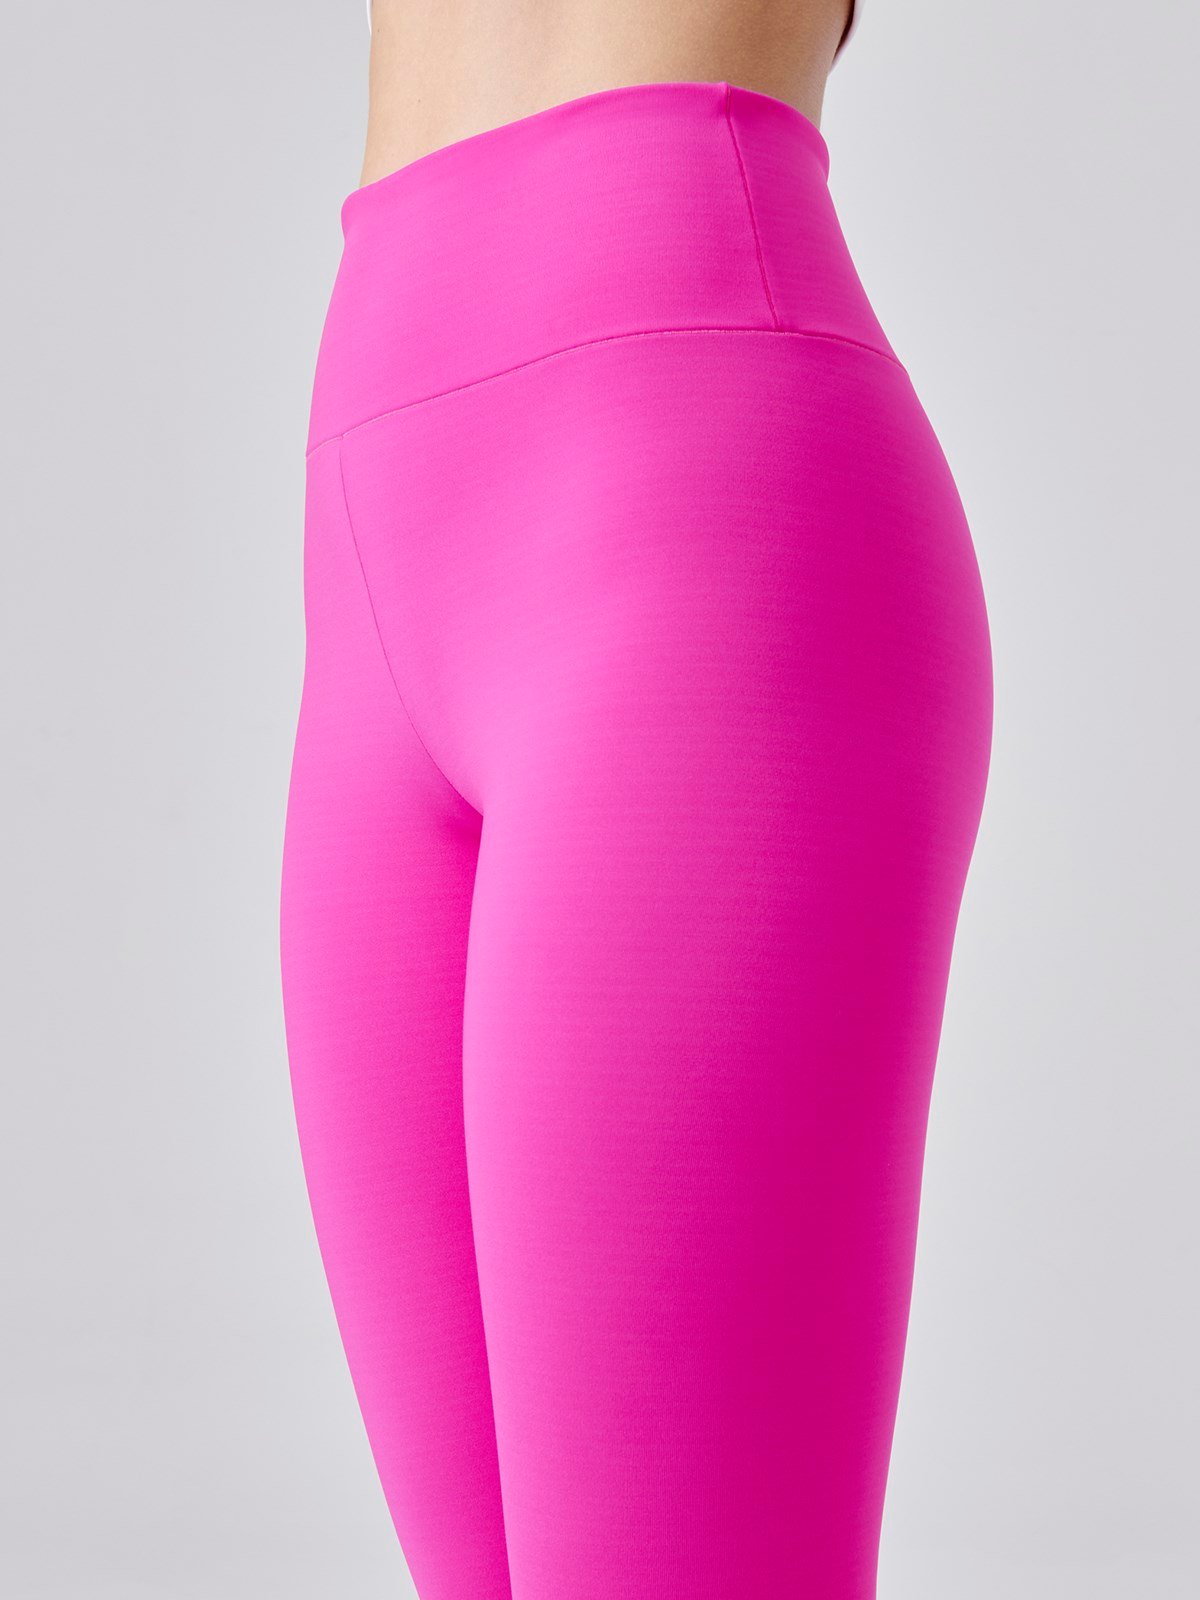 Shaping slimming leggings PUSH UP HYPNOTIZE K130 pink MITARE Size S Color  Pink